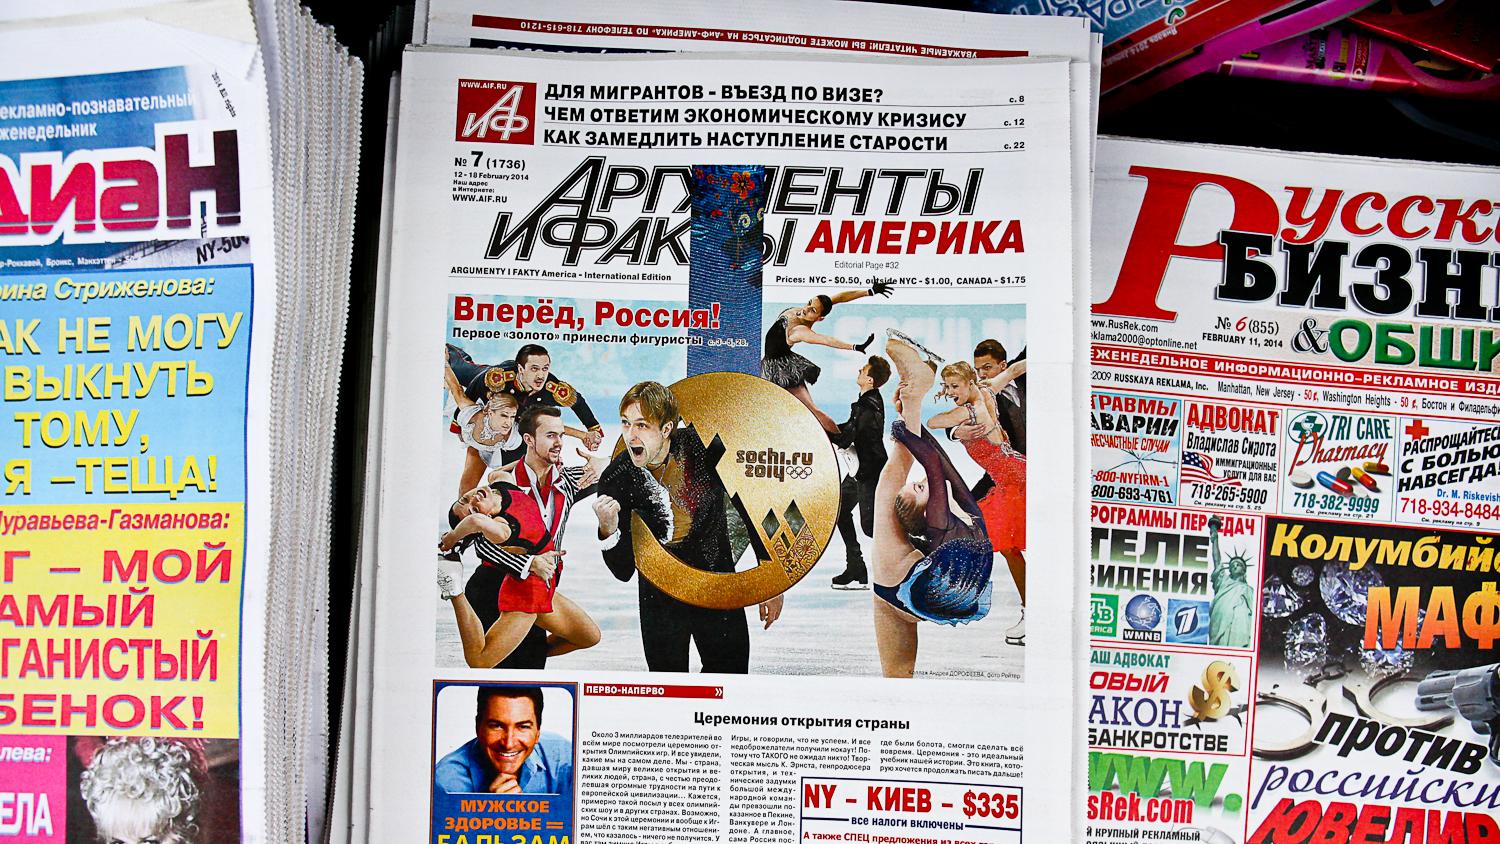 A copy of Argumenty i Fakty, a weekly newspaper from Moskow, is on sale at a Brighton Beach shop.